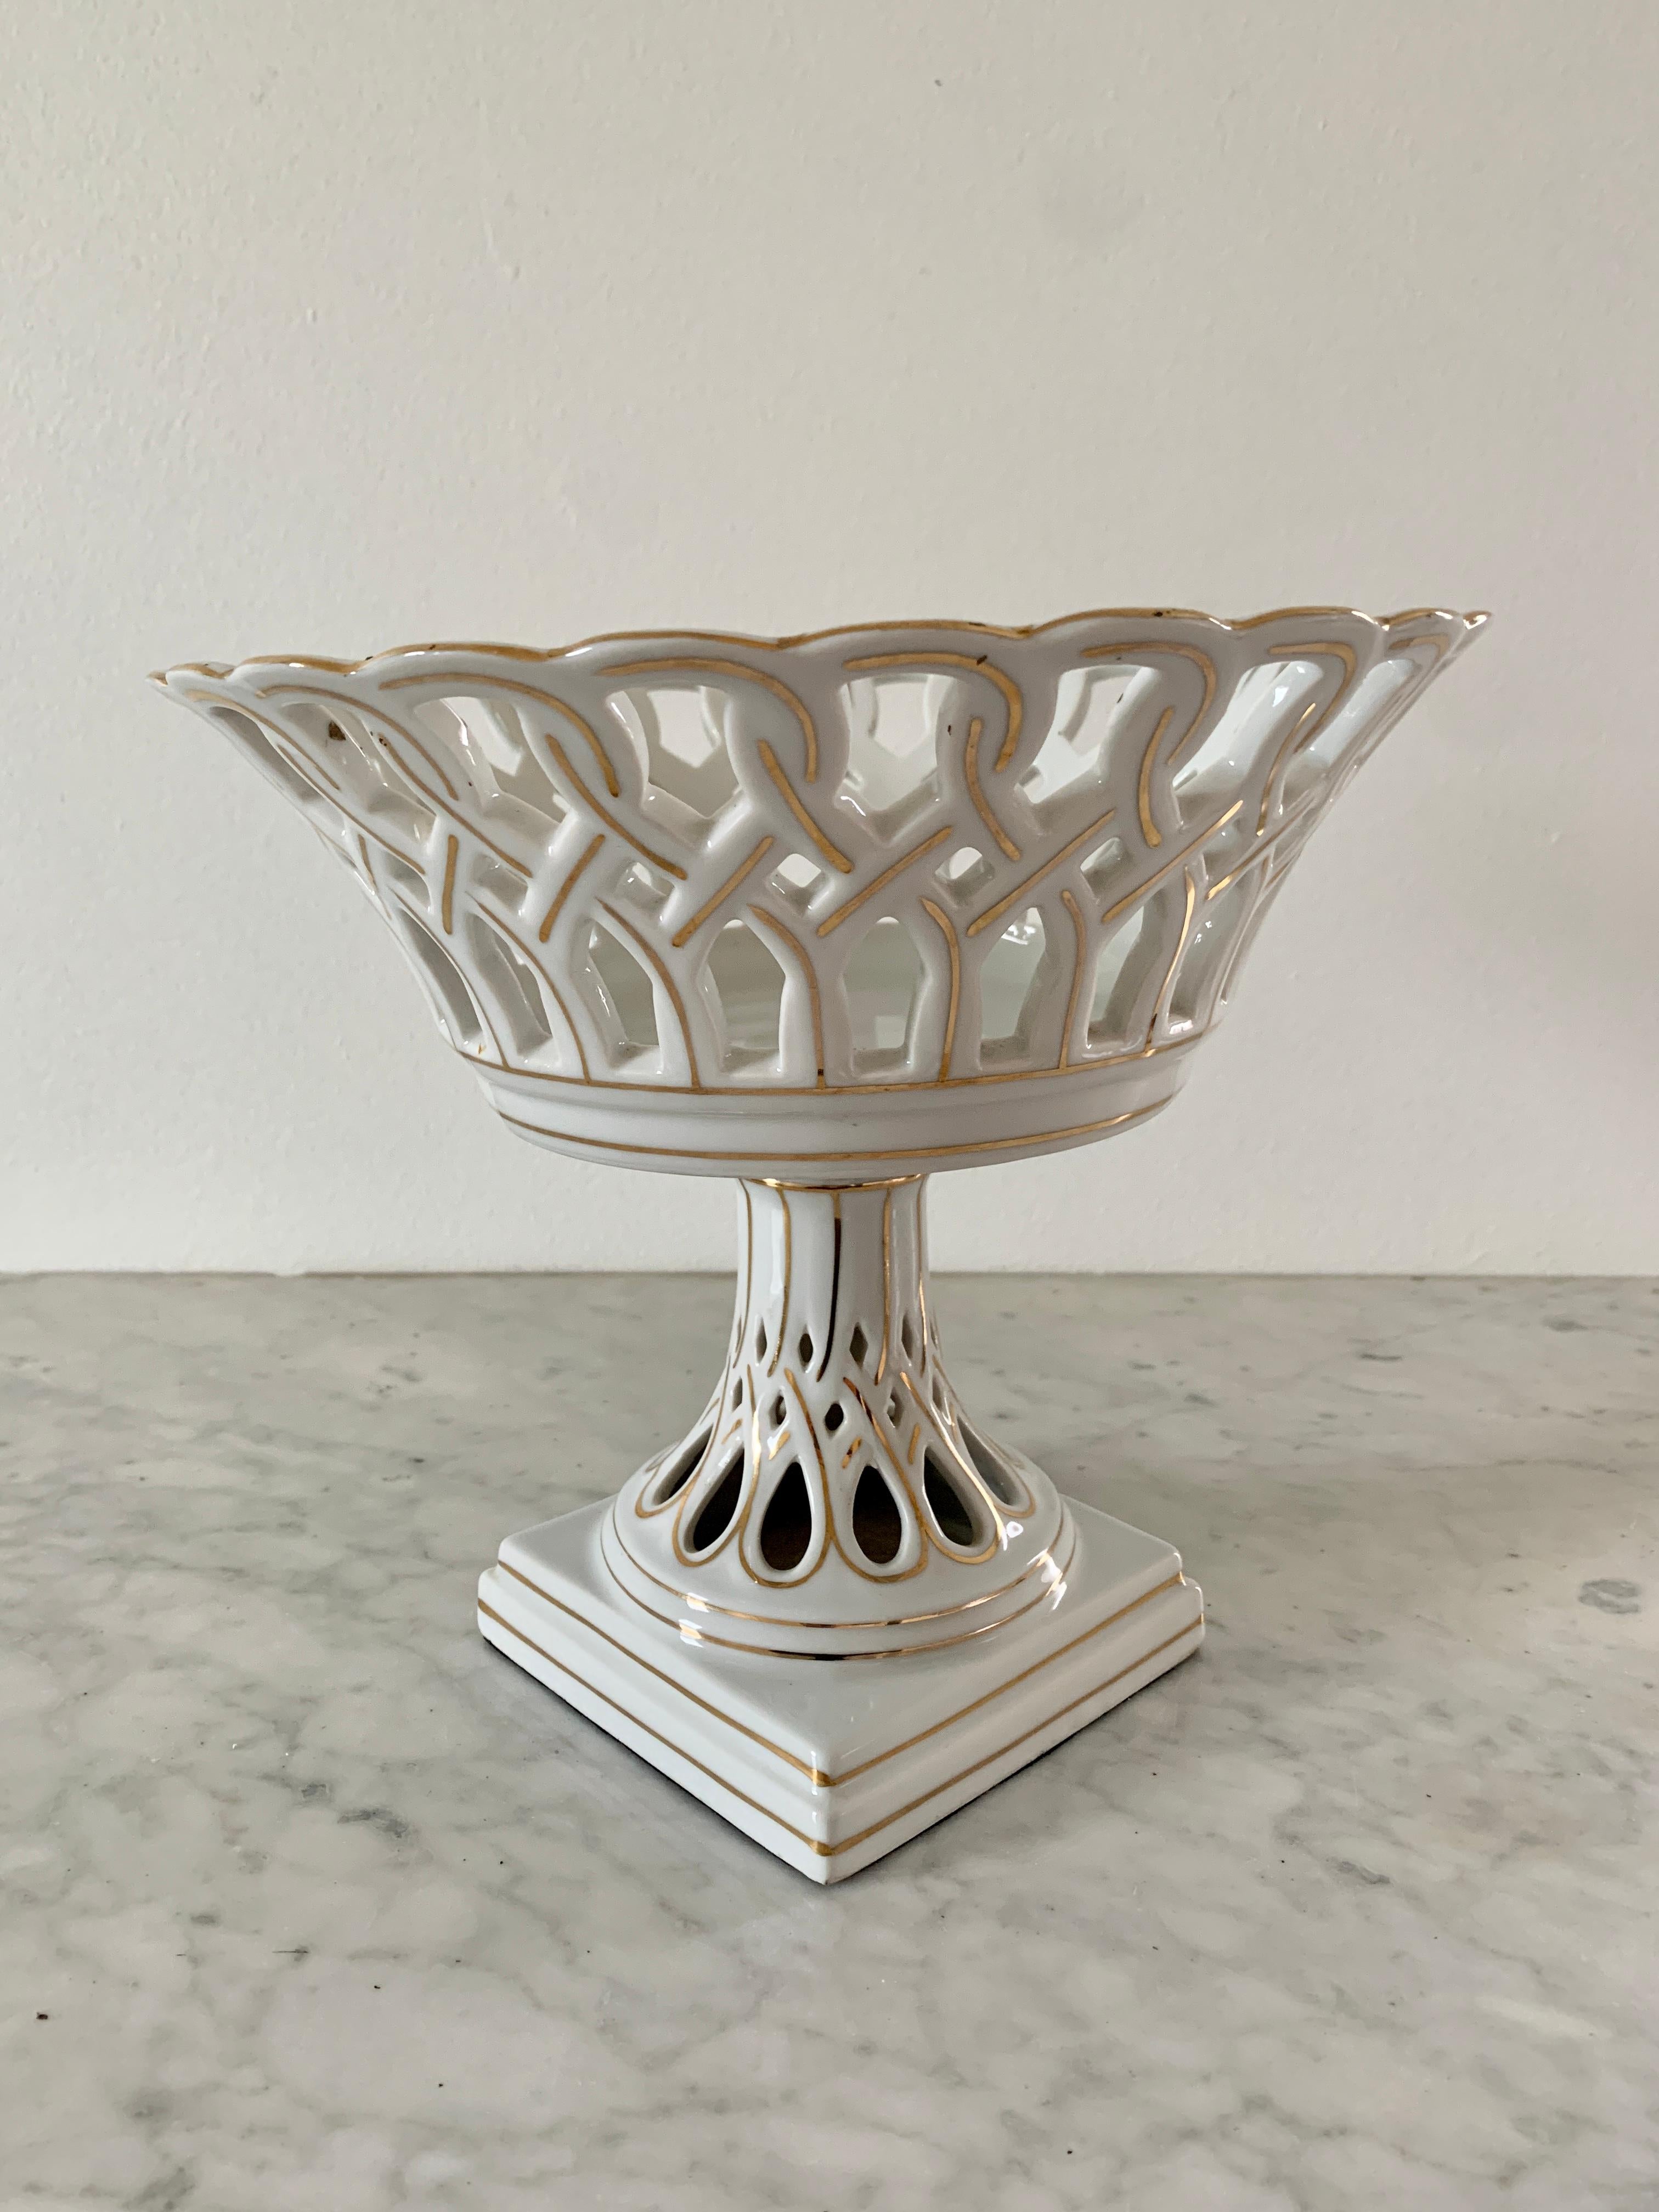 Reticulated White Porcelain and Gold Gilt Basket Compote In Good Condition For Sale In Elkhart, IN